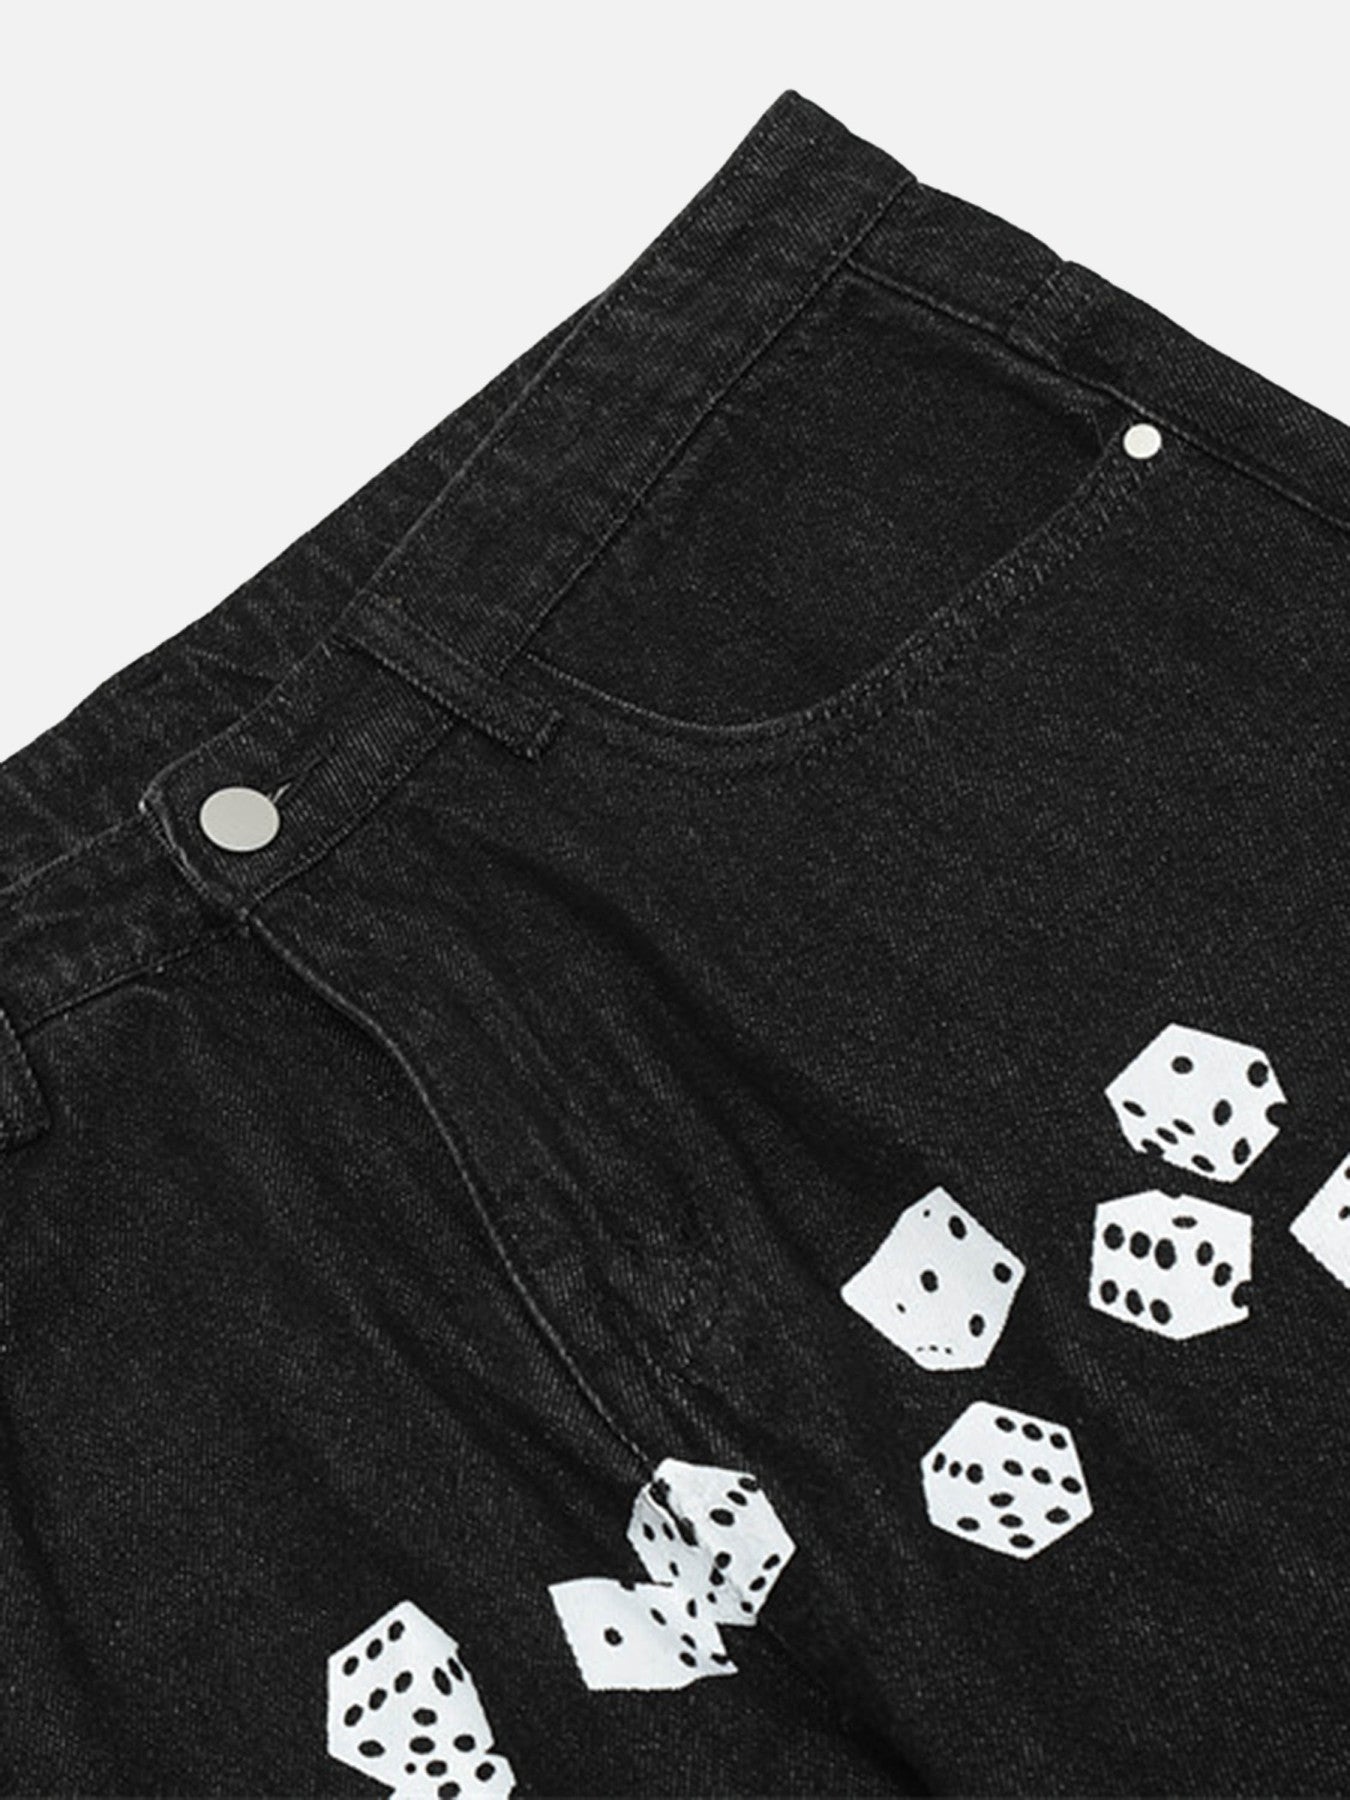 Thesupermade Vintage Dice Print Jeans